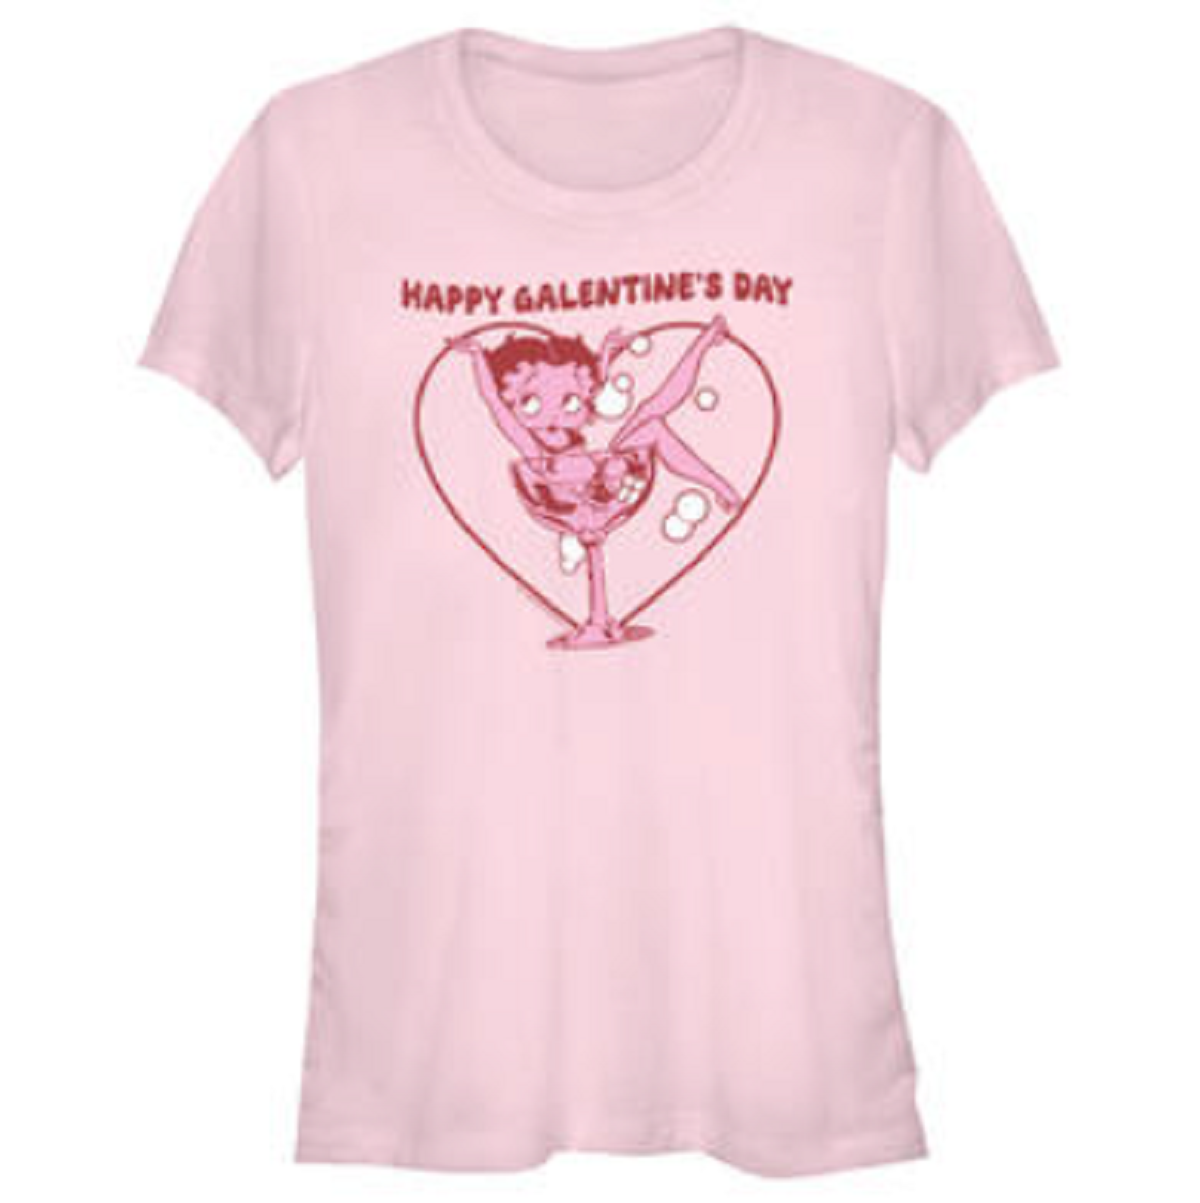 56% Off Happy Galentines Day Graphic Tees at Sears